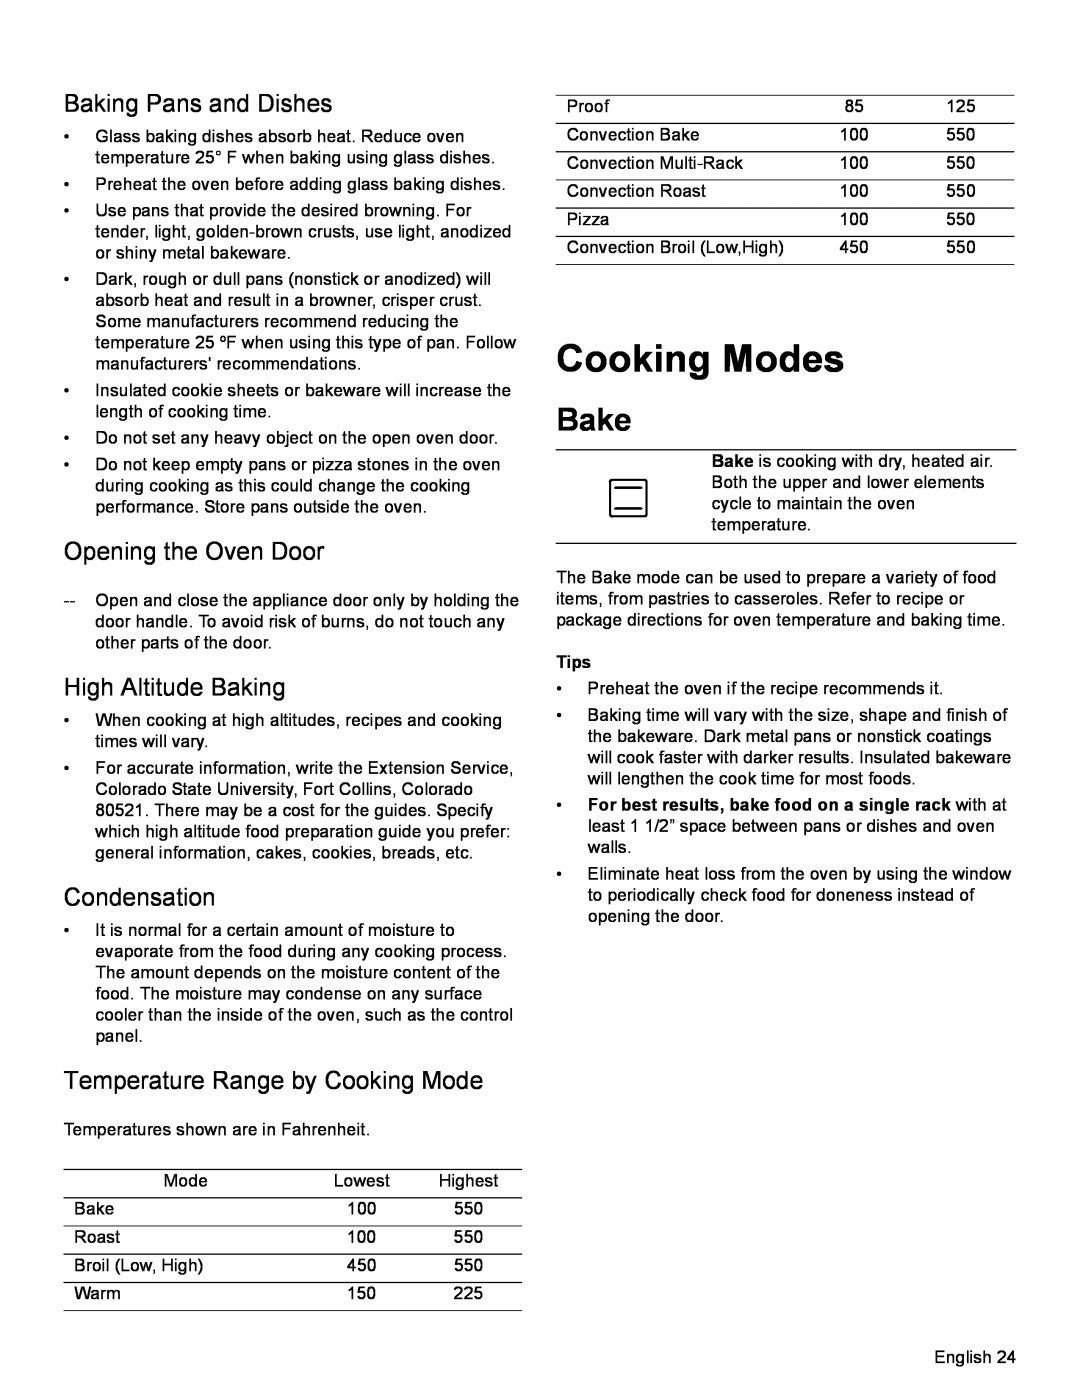 Bosch Appliances HDI8054U Cooking Modes, Bake, Baking Pans and Dishes, Opening the Oven Door, High Altitude Baking, Tips 